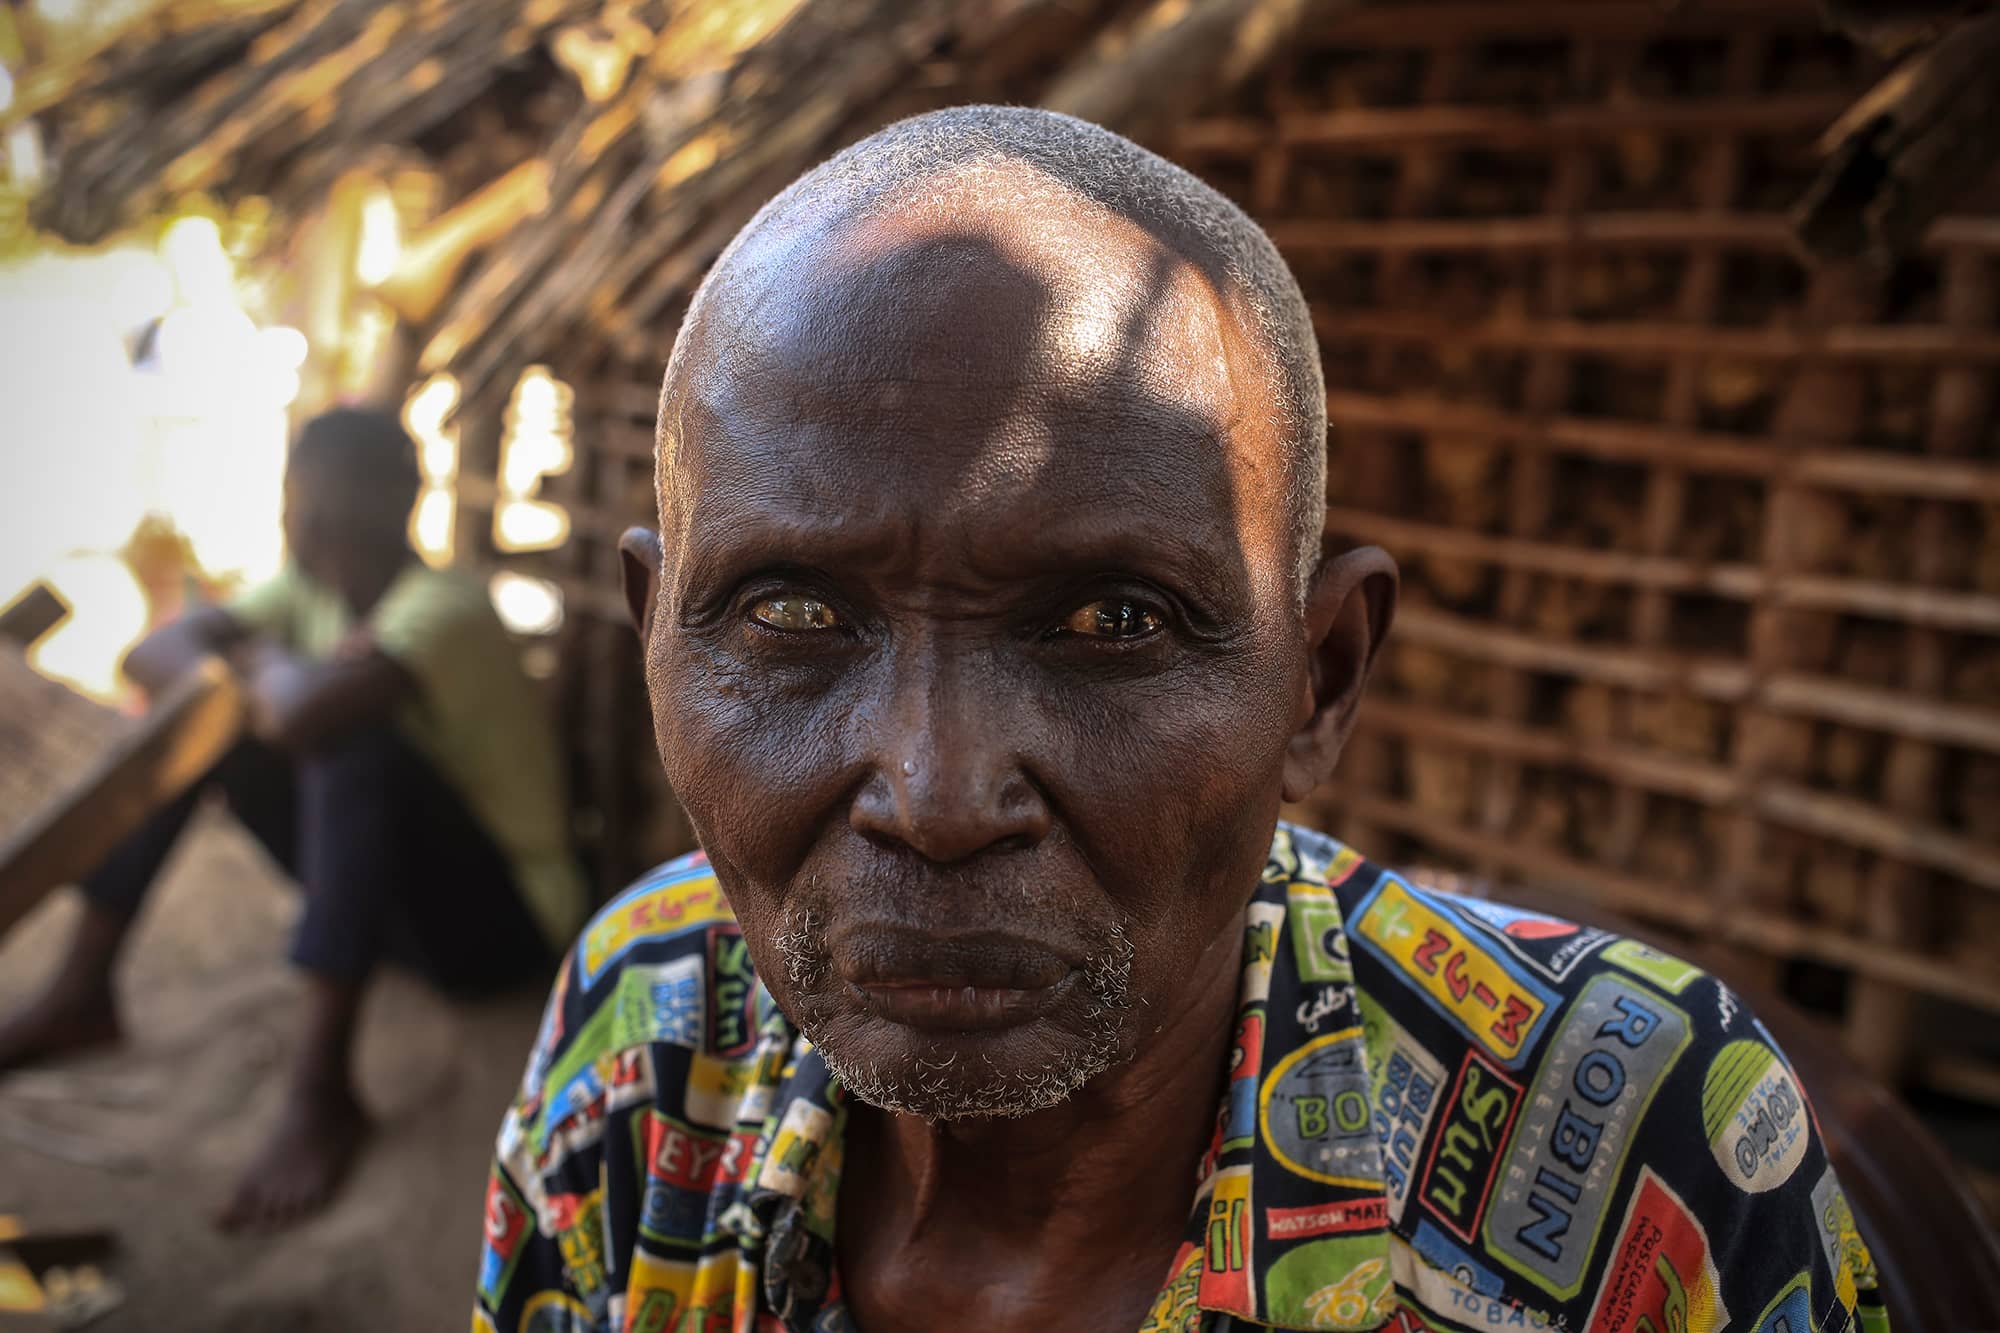 Man living with river blindness and impaired vision